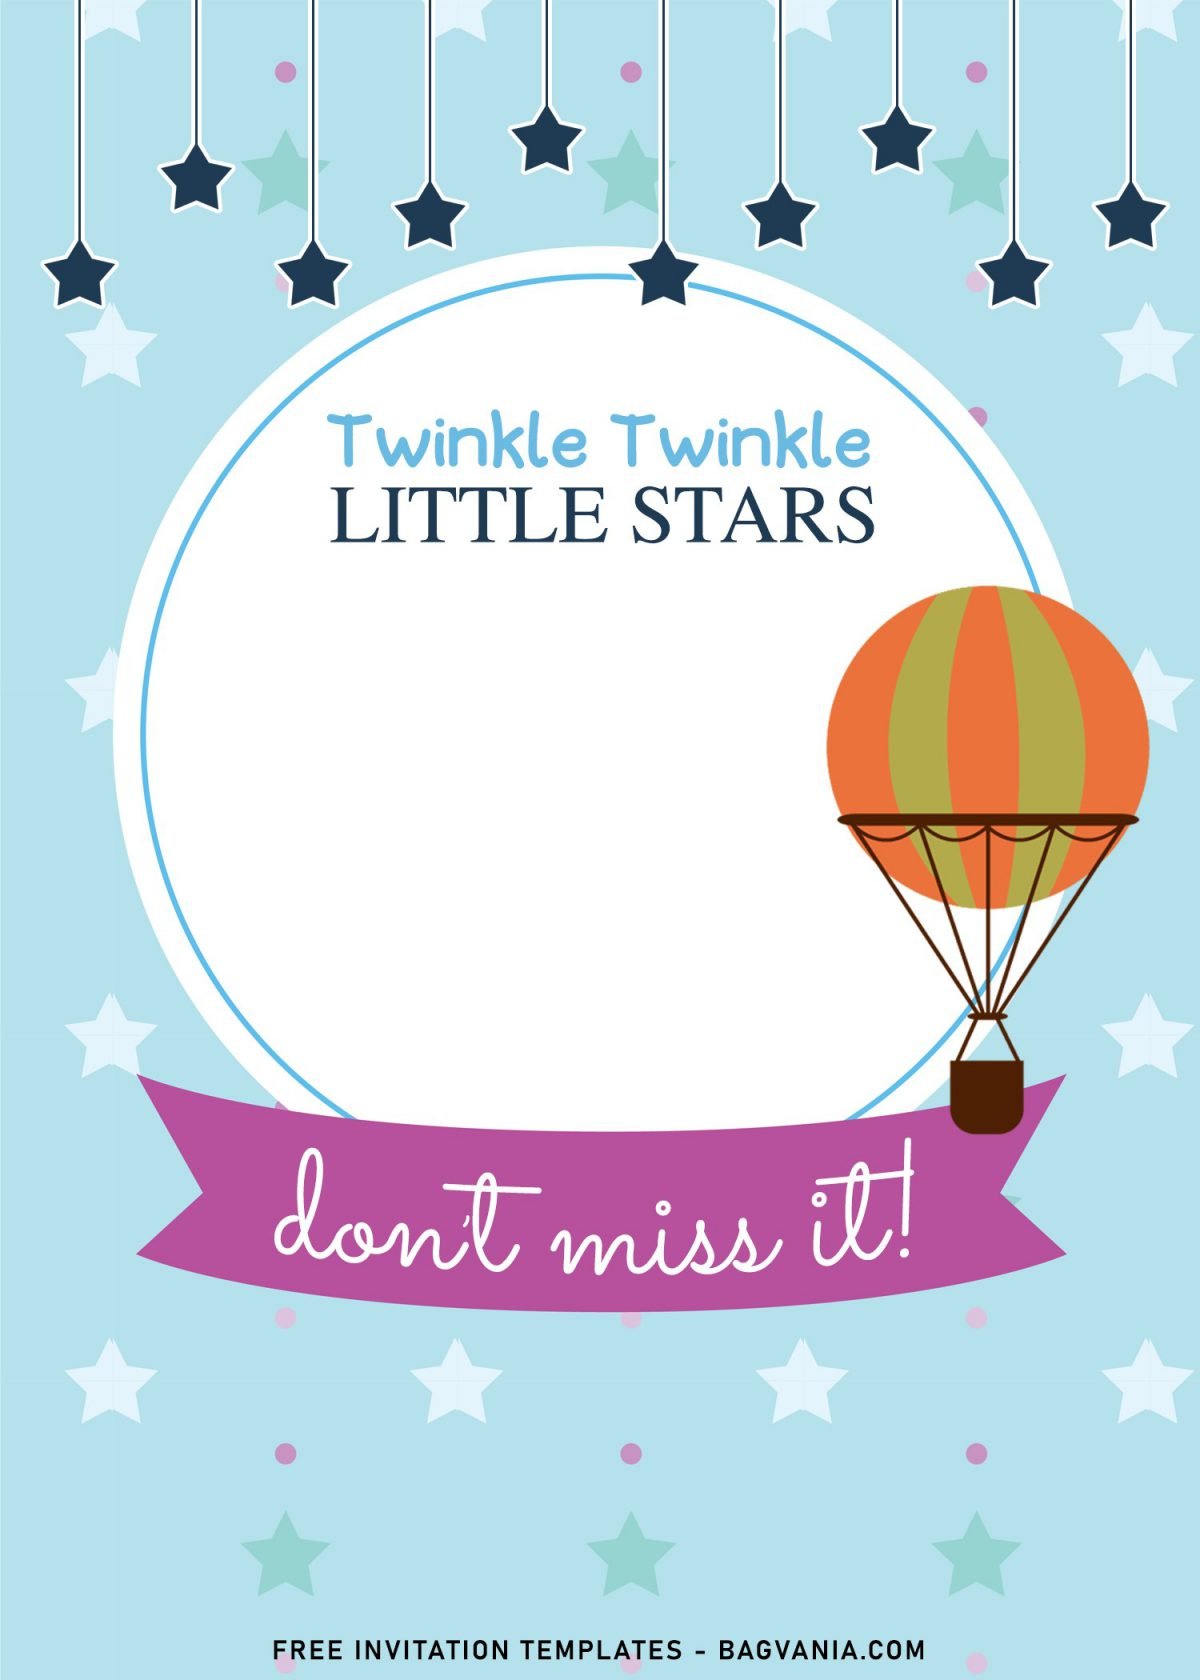 7+ Twinkle Twinkle Little Stars Birthday Invitation Templates For Any Ages and has Hanging stars